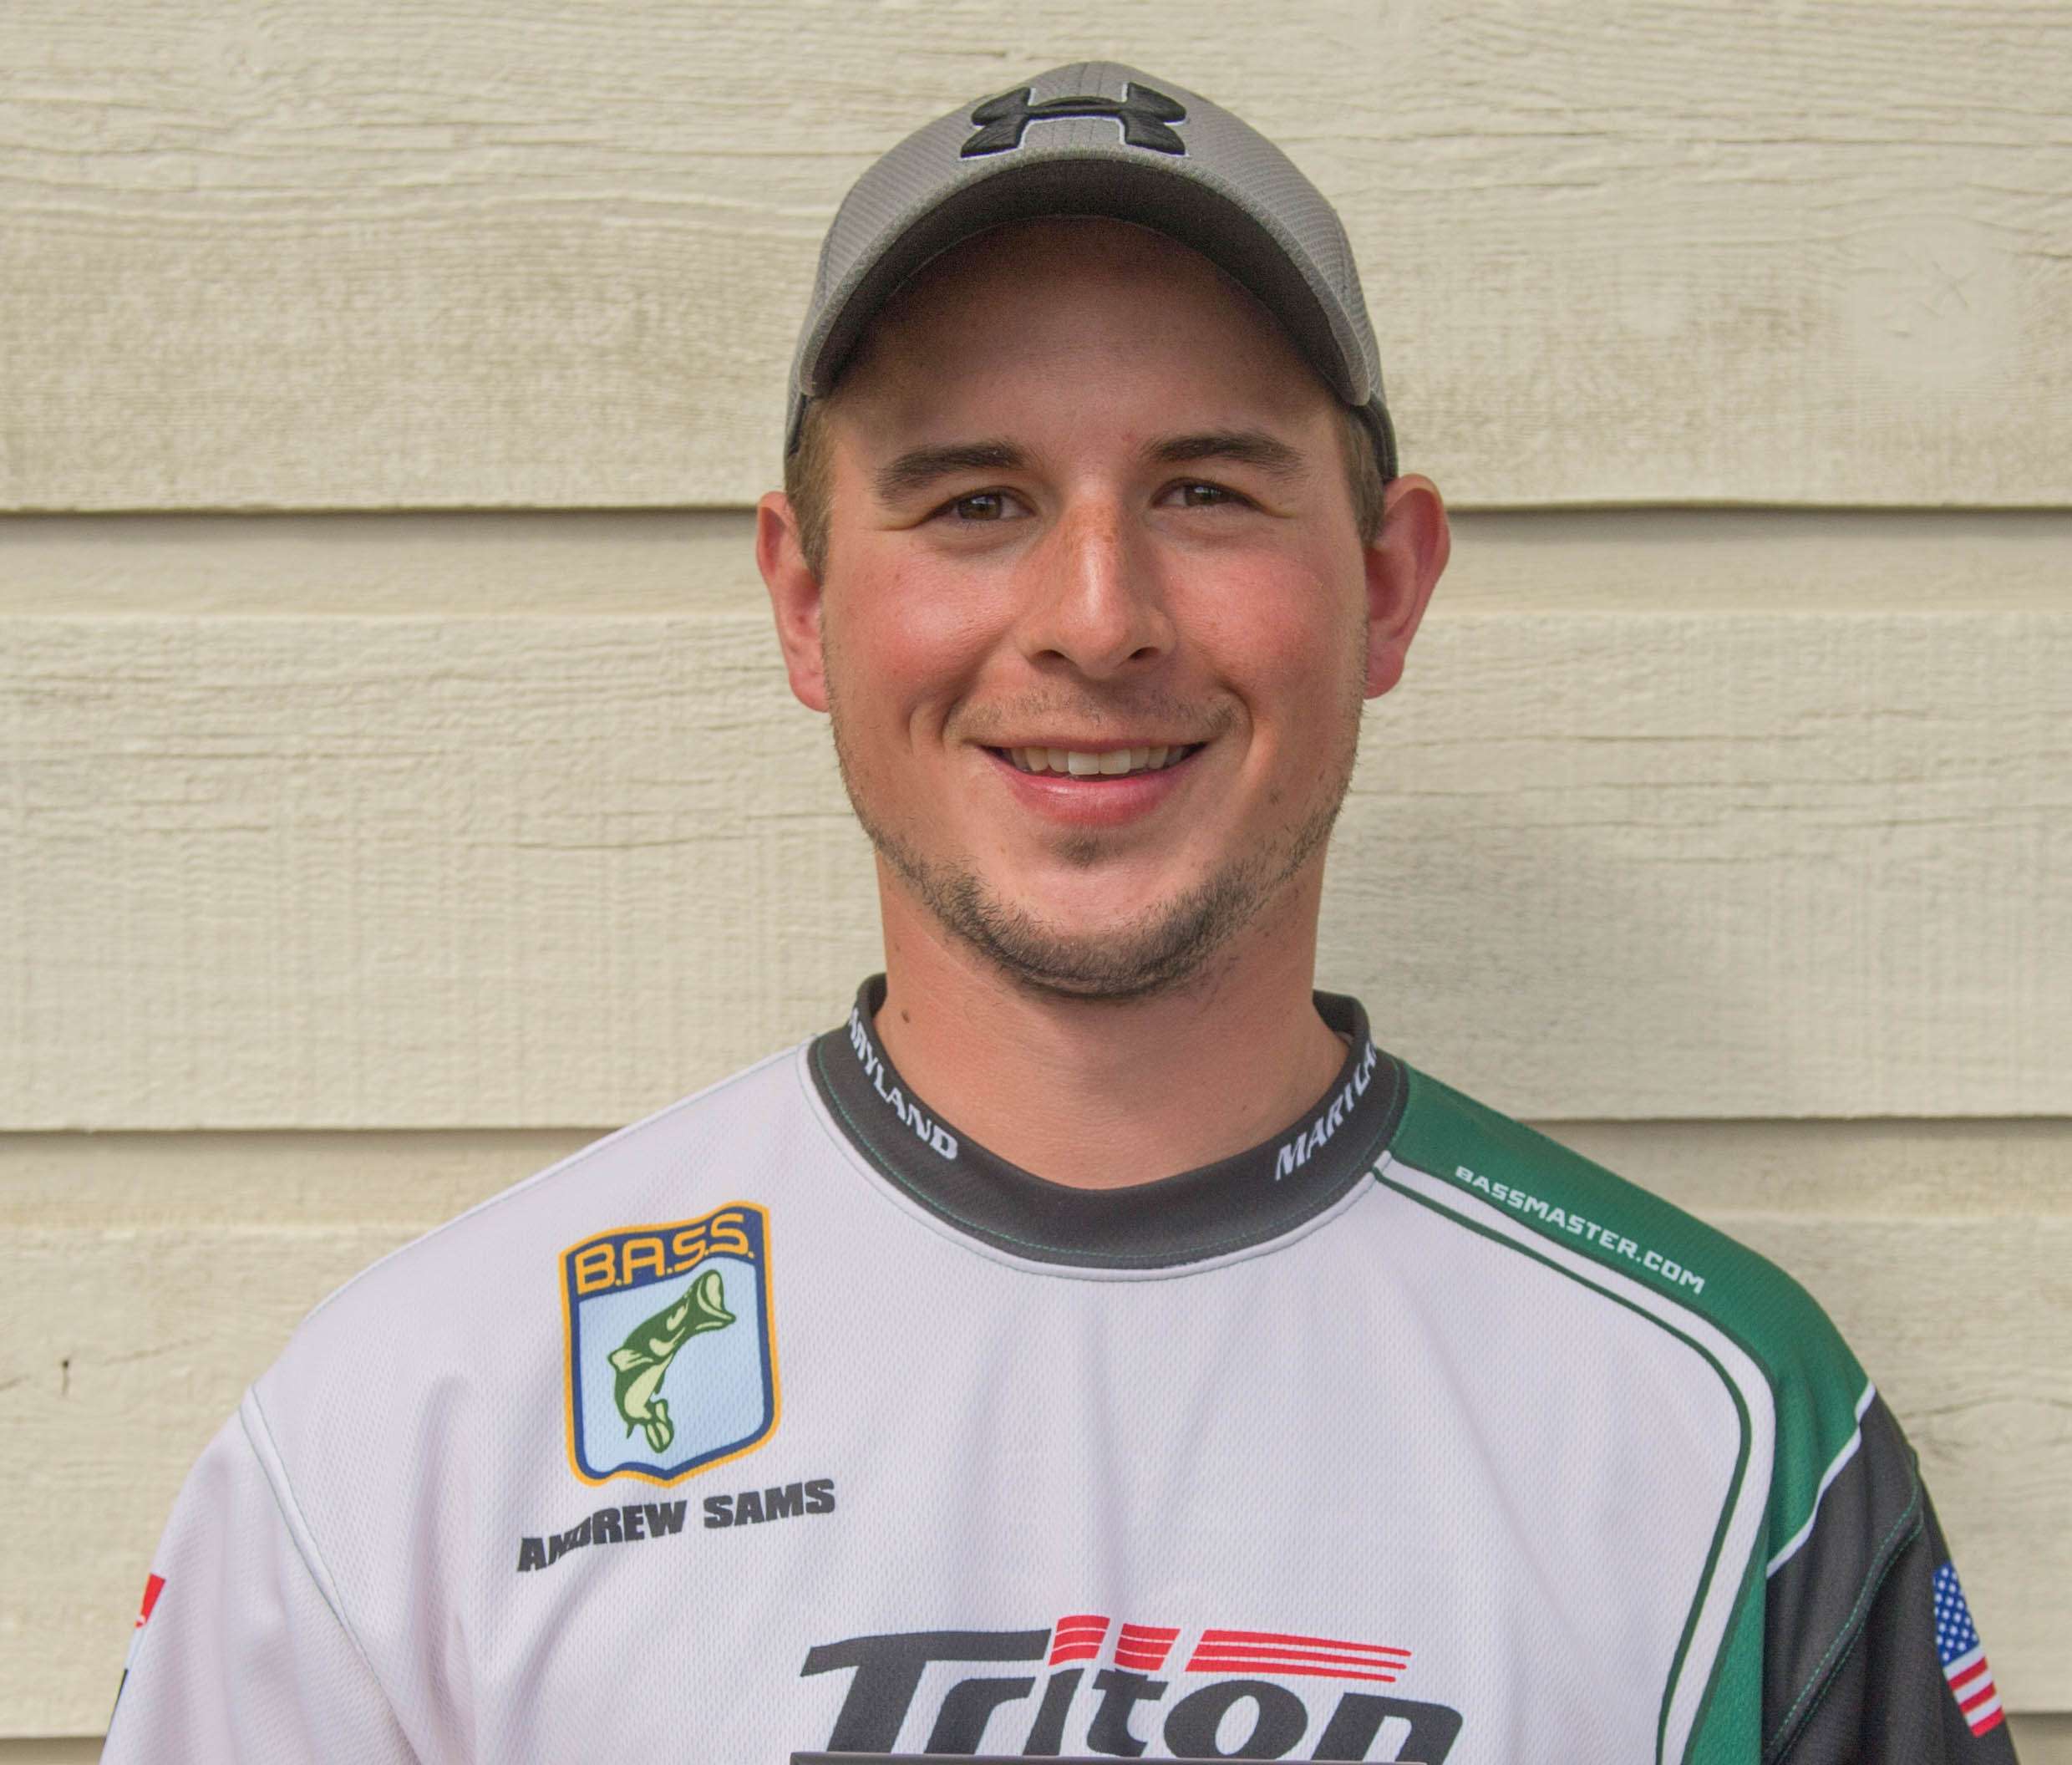 Andrew Sams <br>
Maryland Boater <br>
Andrew Sams is a former Junior Bassmaster champ, now plying his skills learned at a young age against adults in the club, Team Outcast. He works for FedEx now, as a freight dock worker. He likes hunting and crabbing when heâs not fishing. Sams is sponsored by the Maryland B.A.S.S. Nation.